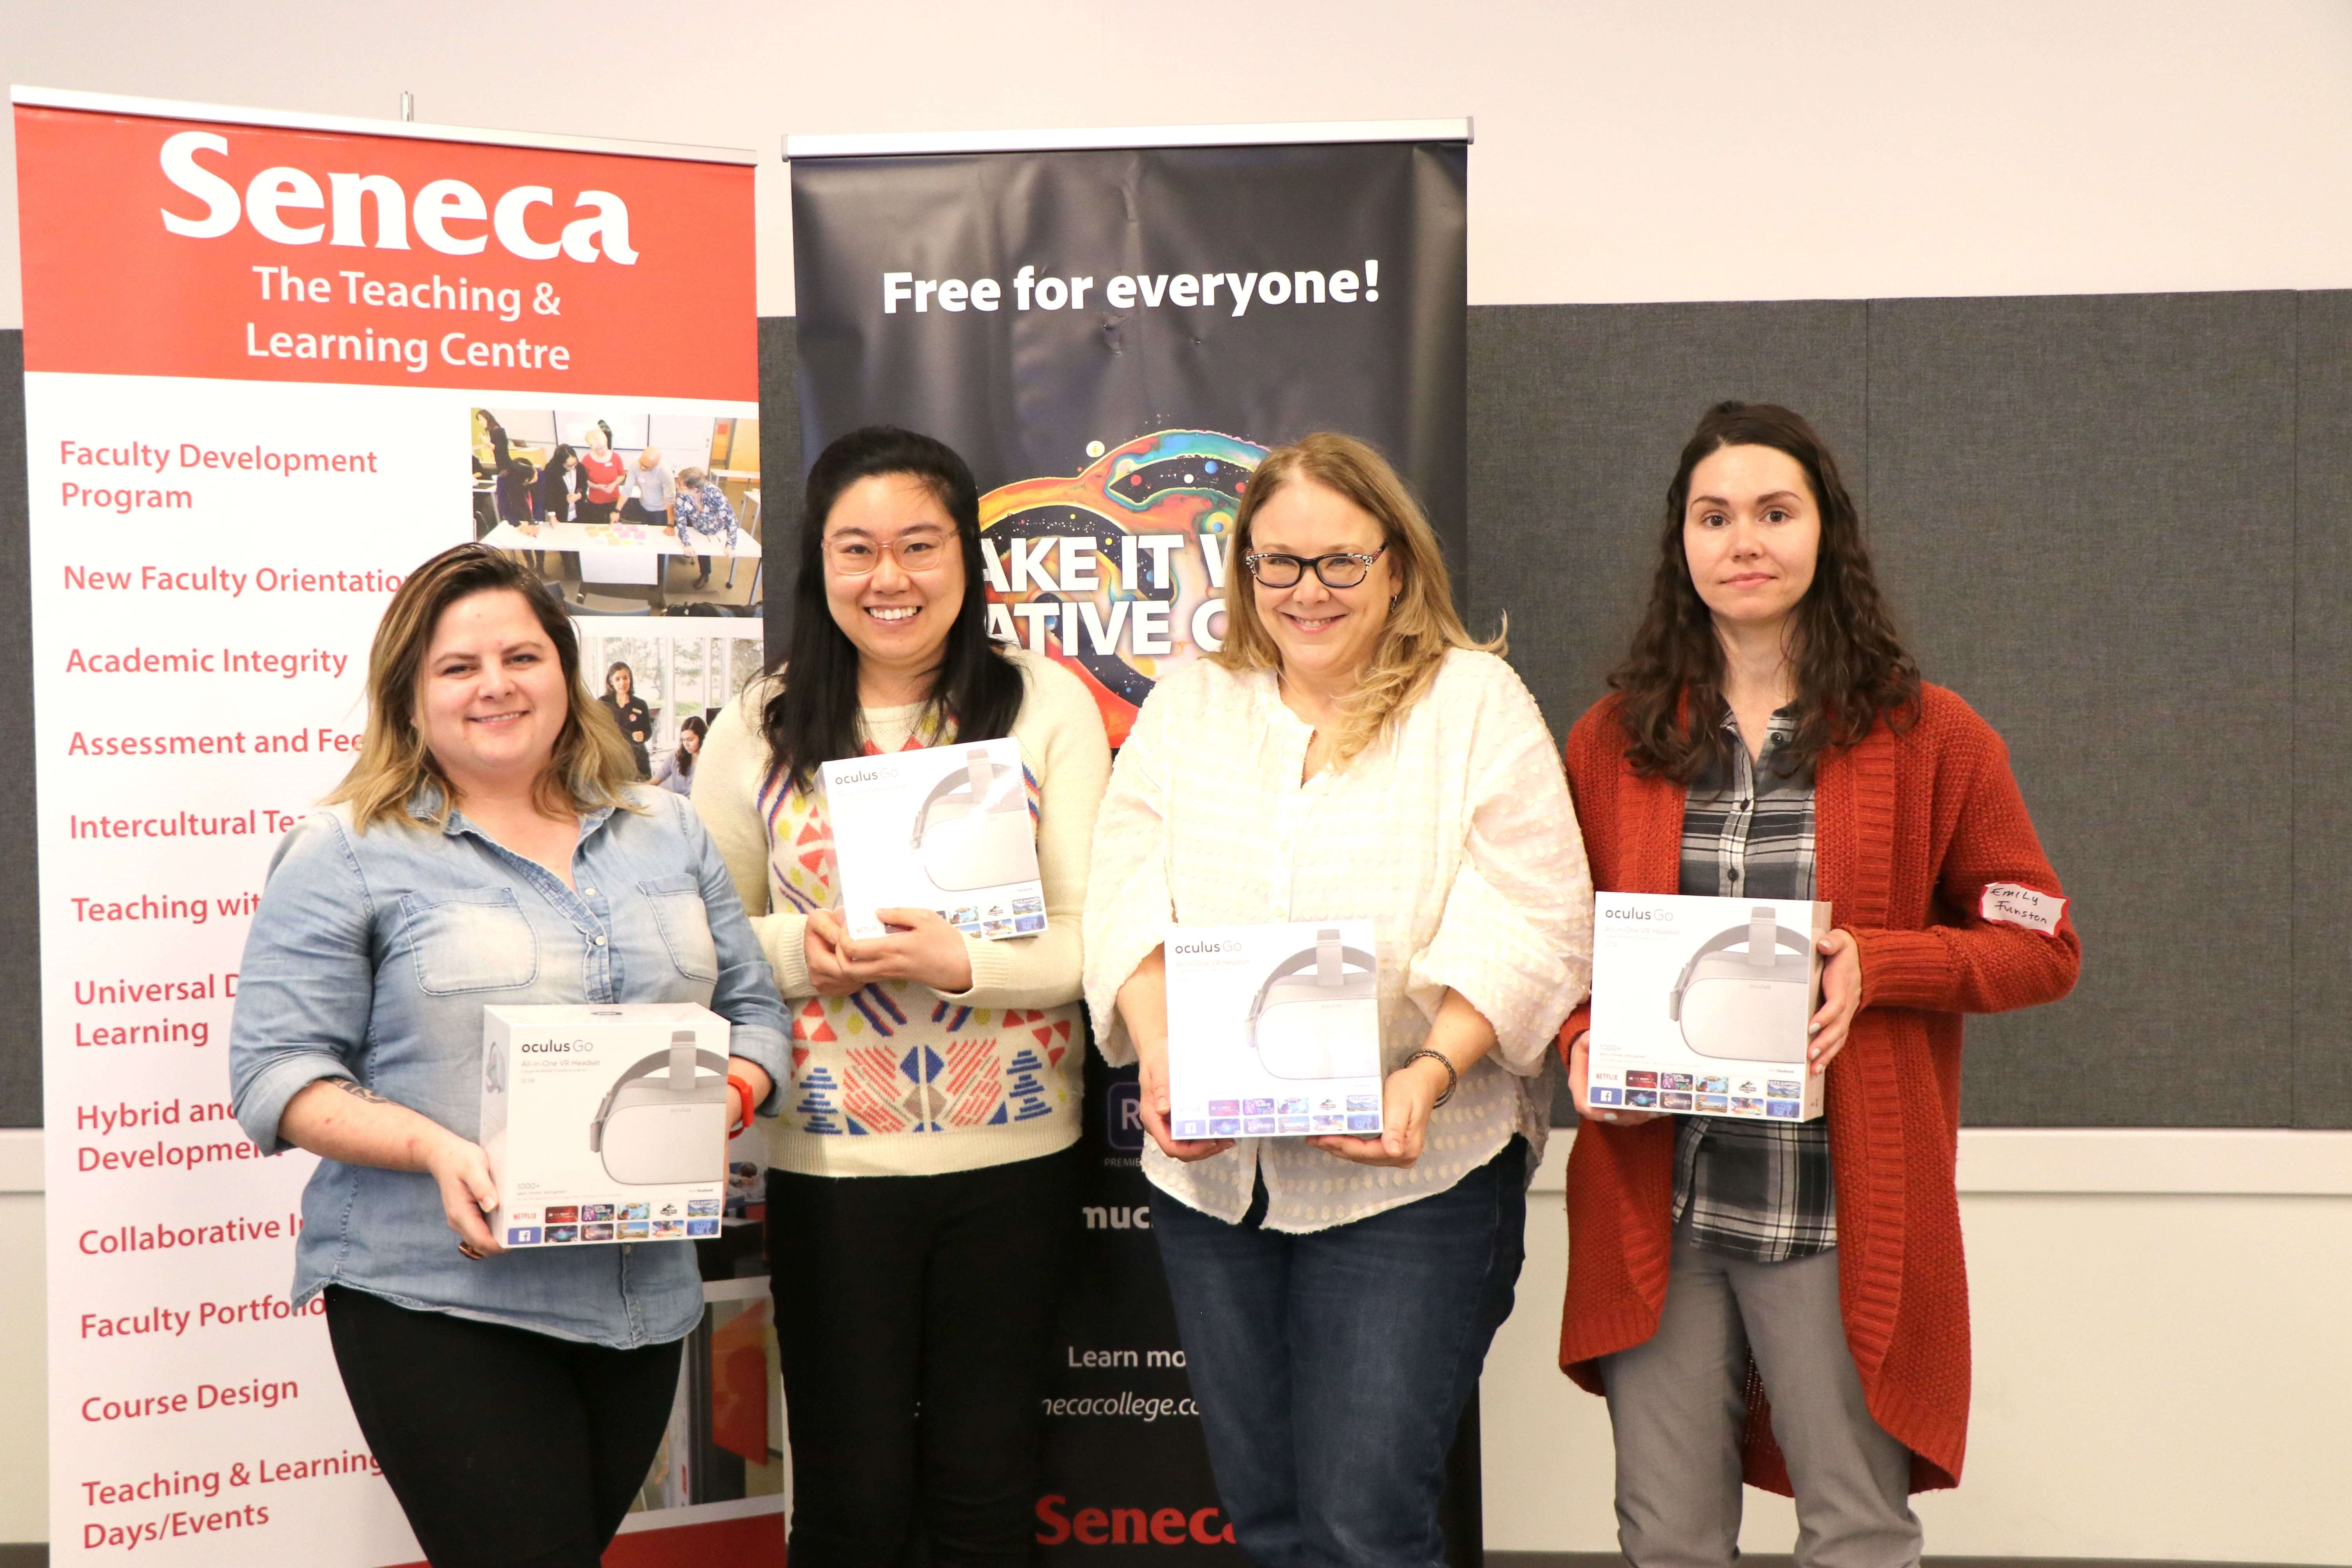 1st place (from left to right): Hailey Wyman (Seneca Libraries); Lydia Tsai (Seneca Libraries); Alison Badali (Work-Integrated Learning); Emily Funston (Seneca Libraries)